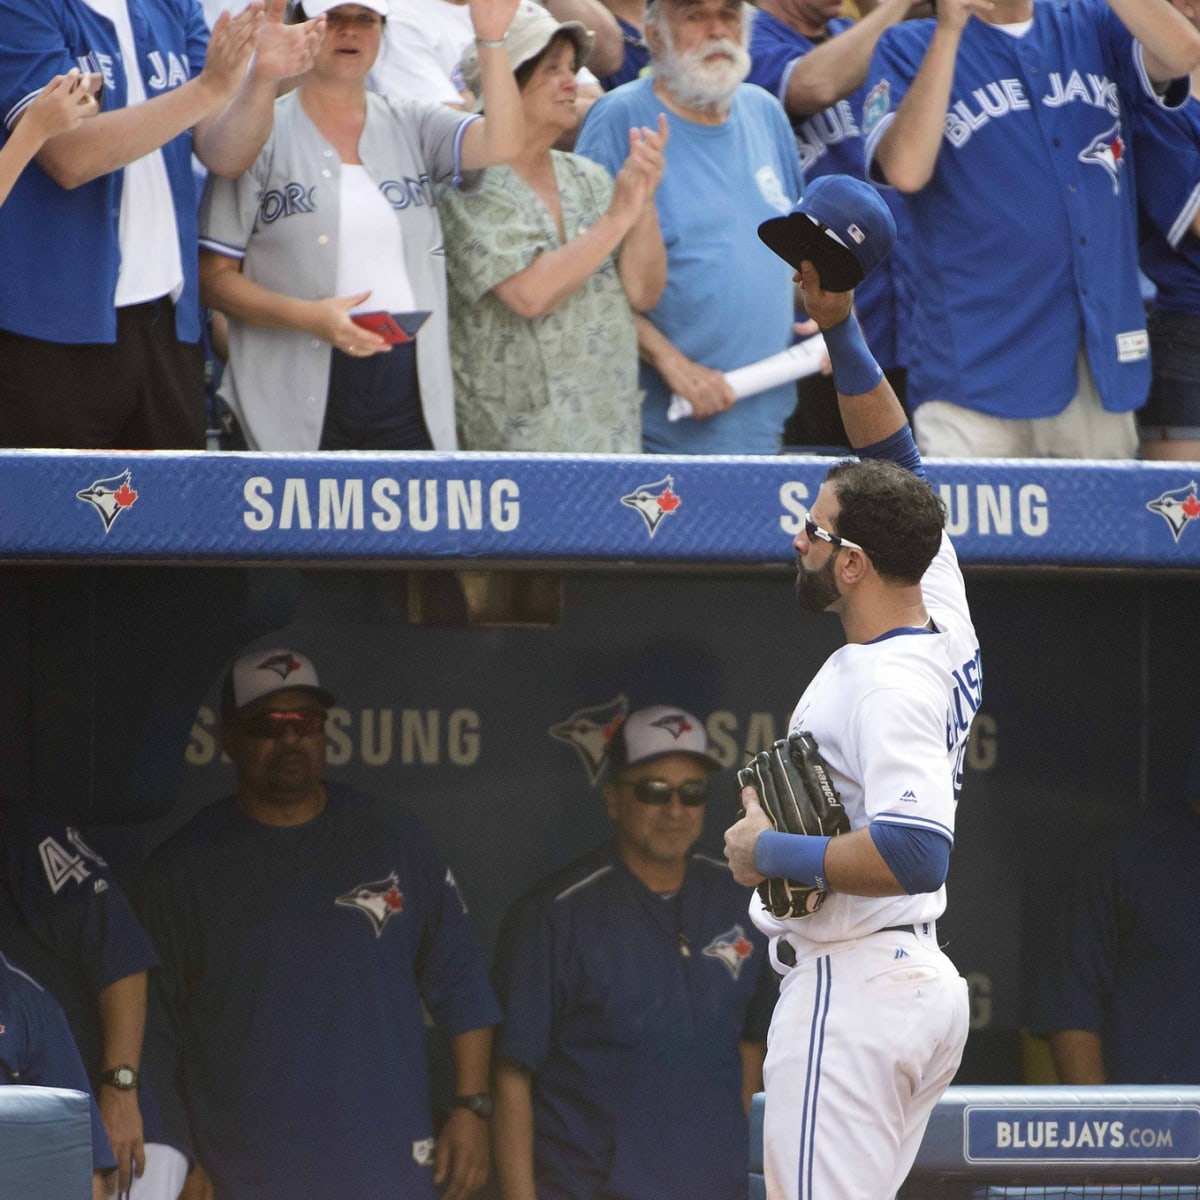 Jose Bautista signs minor league deal with Braves